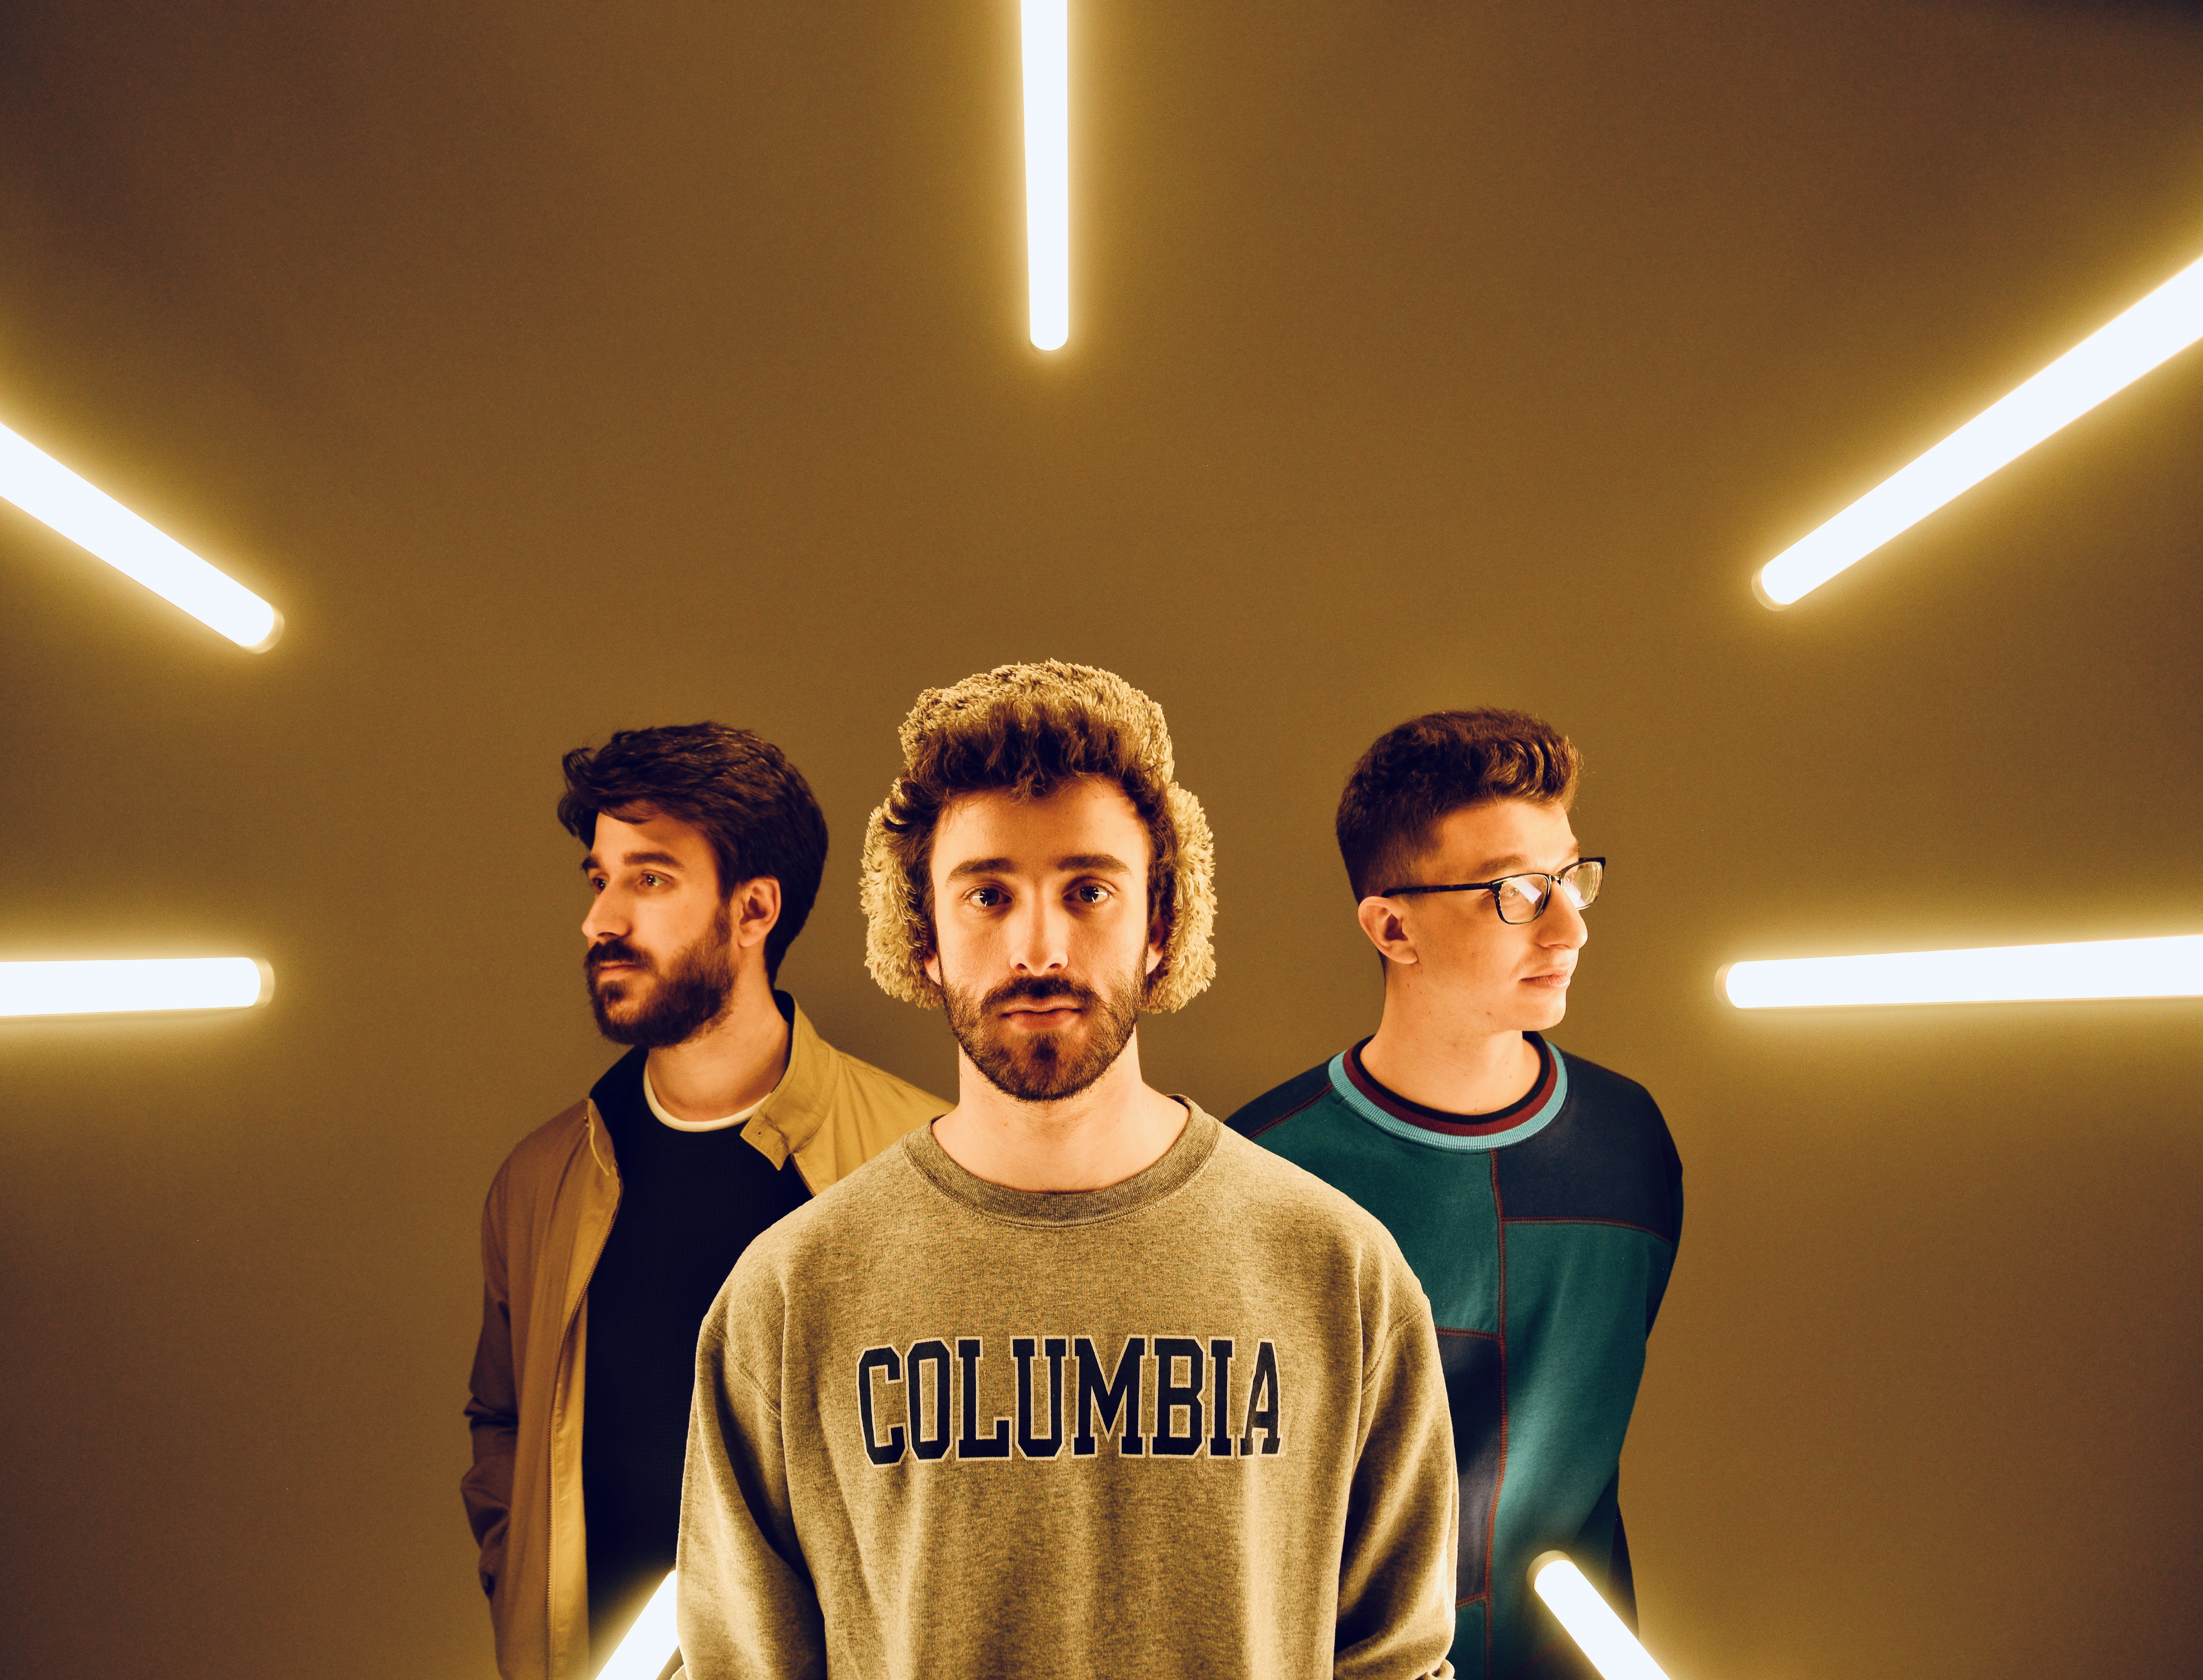 AJR - 100 Bad Days  New Music - CONVERSATIONS ABOUT HER